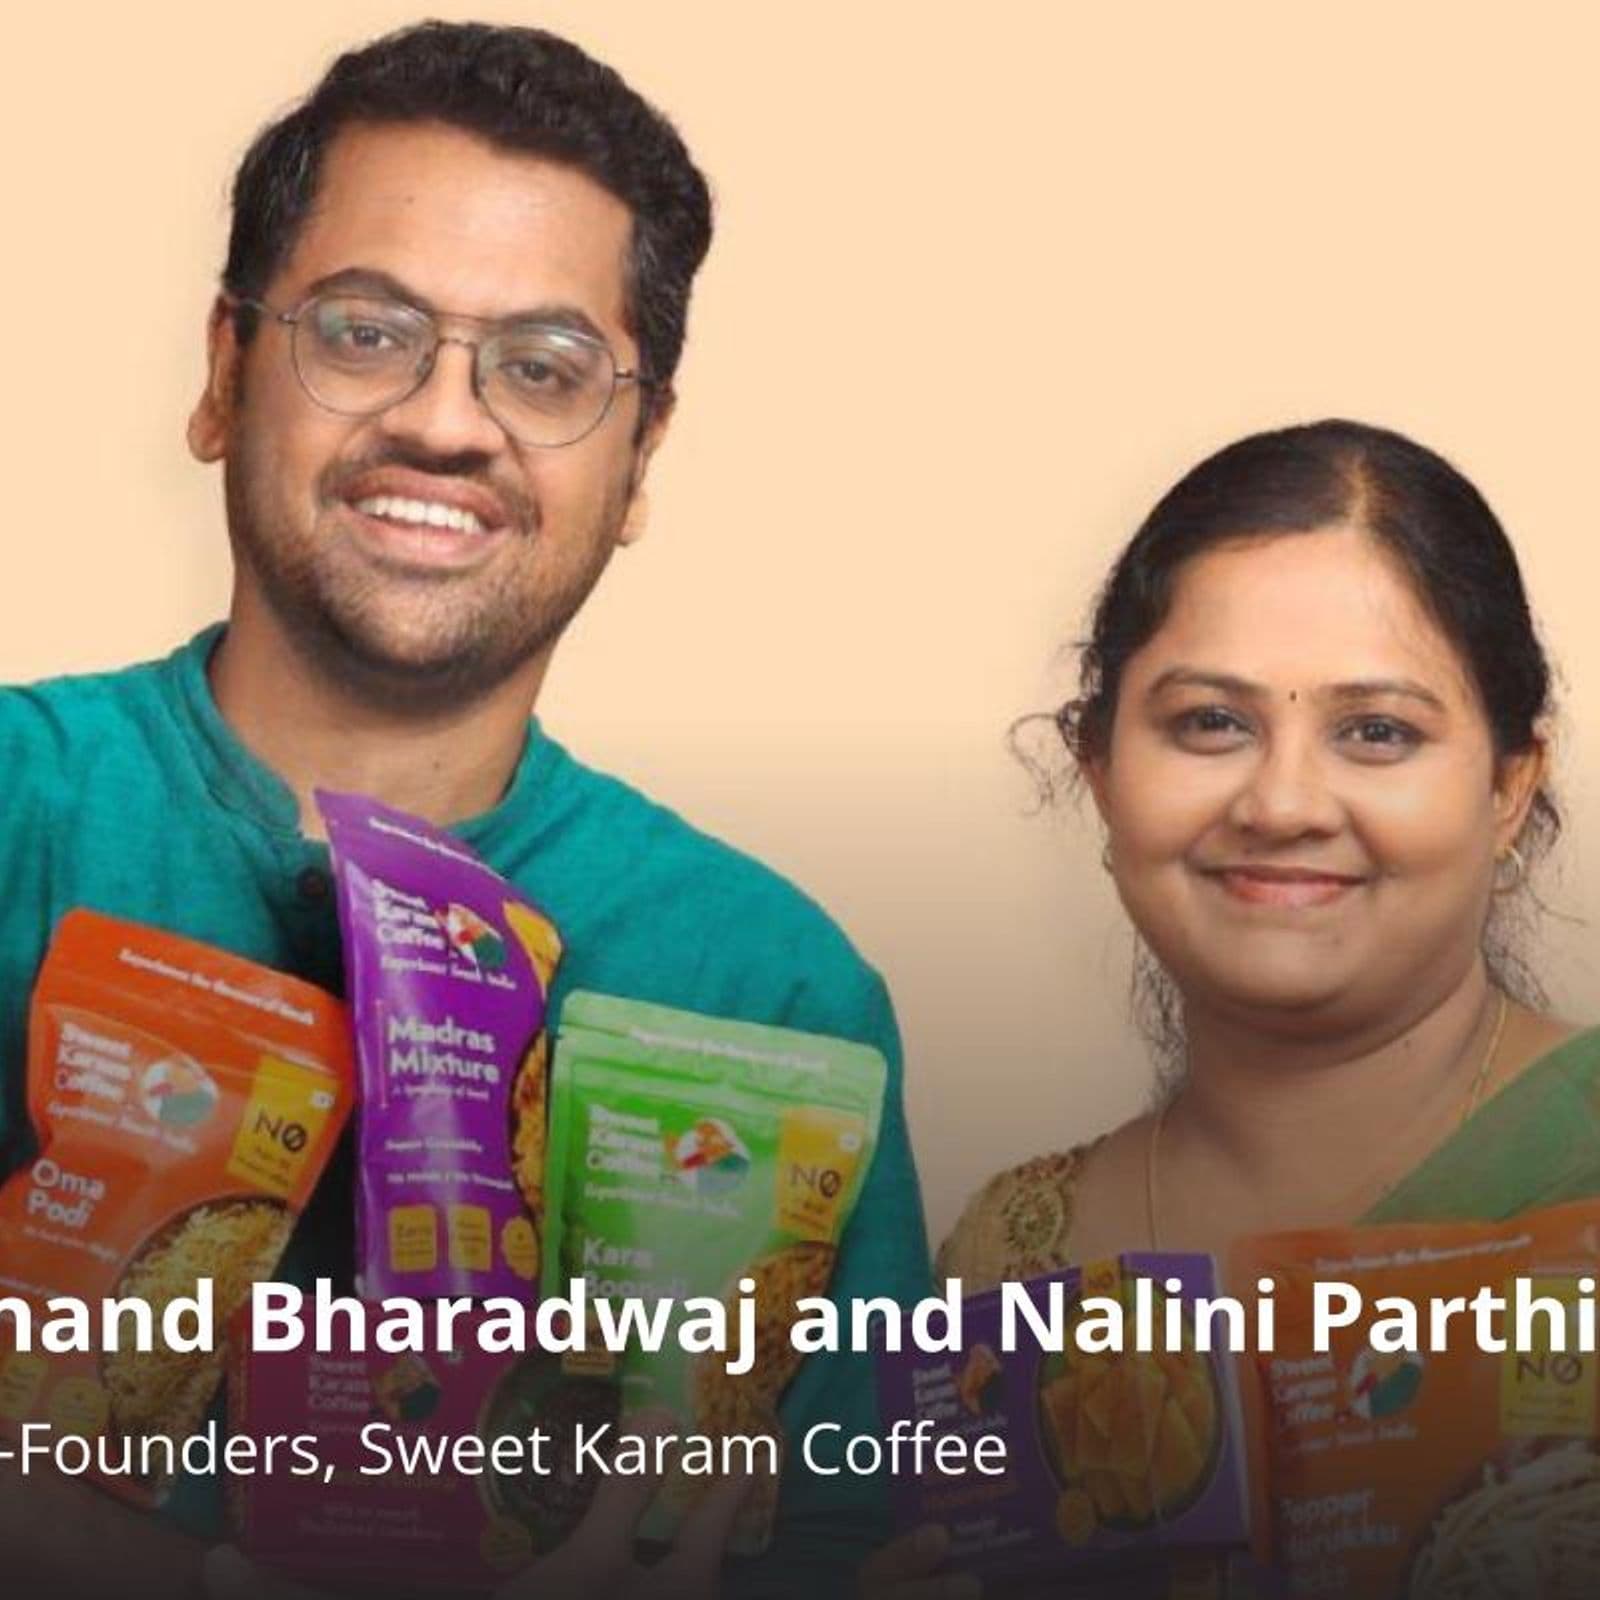 From Dakshin: Sweet Karam Coffee wants to pay a delicious homage to grandma's timeless recipes